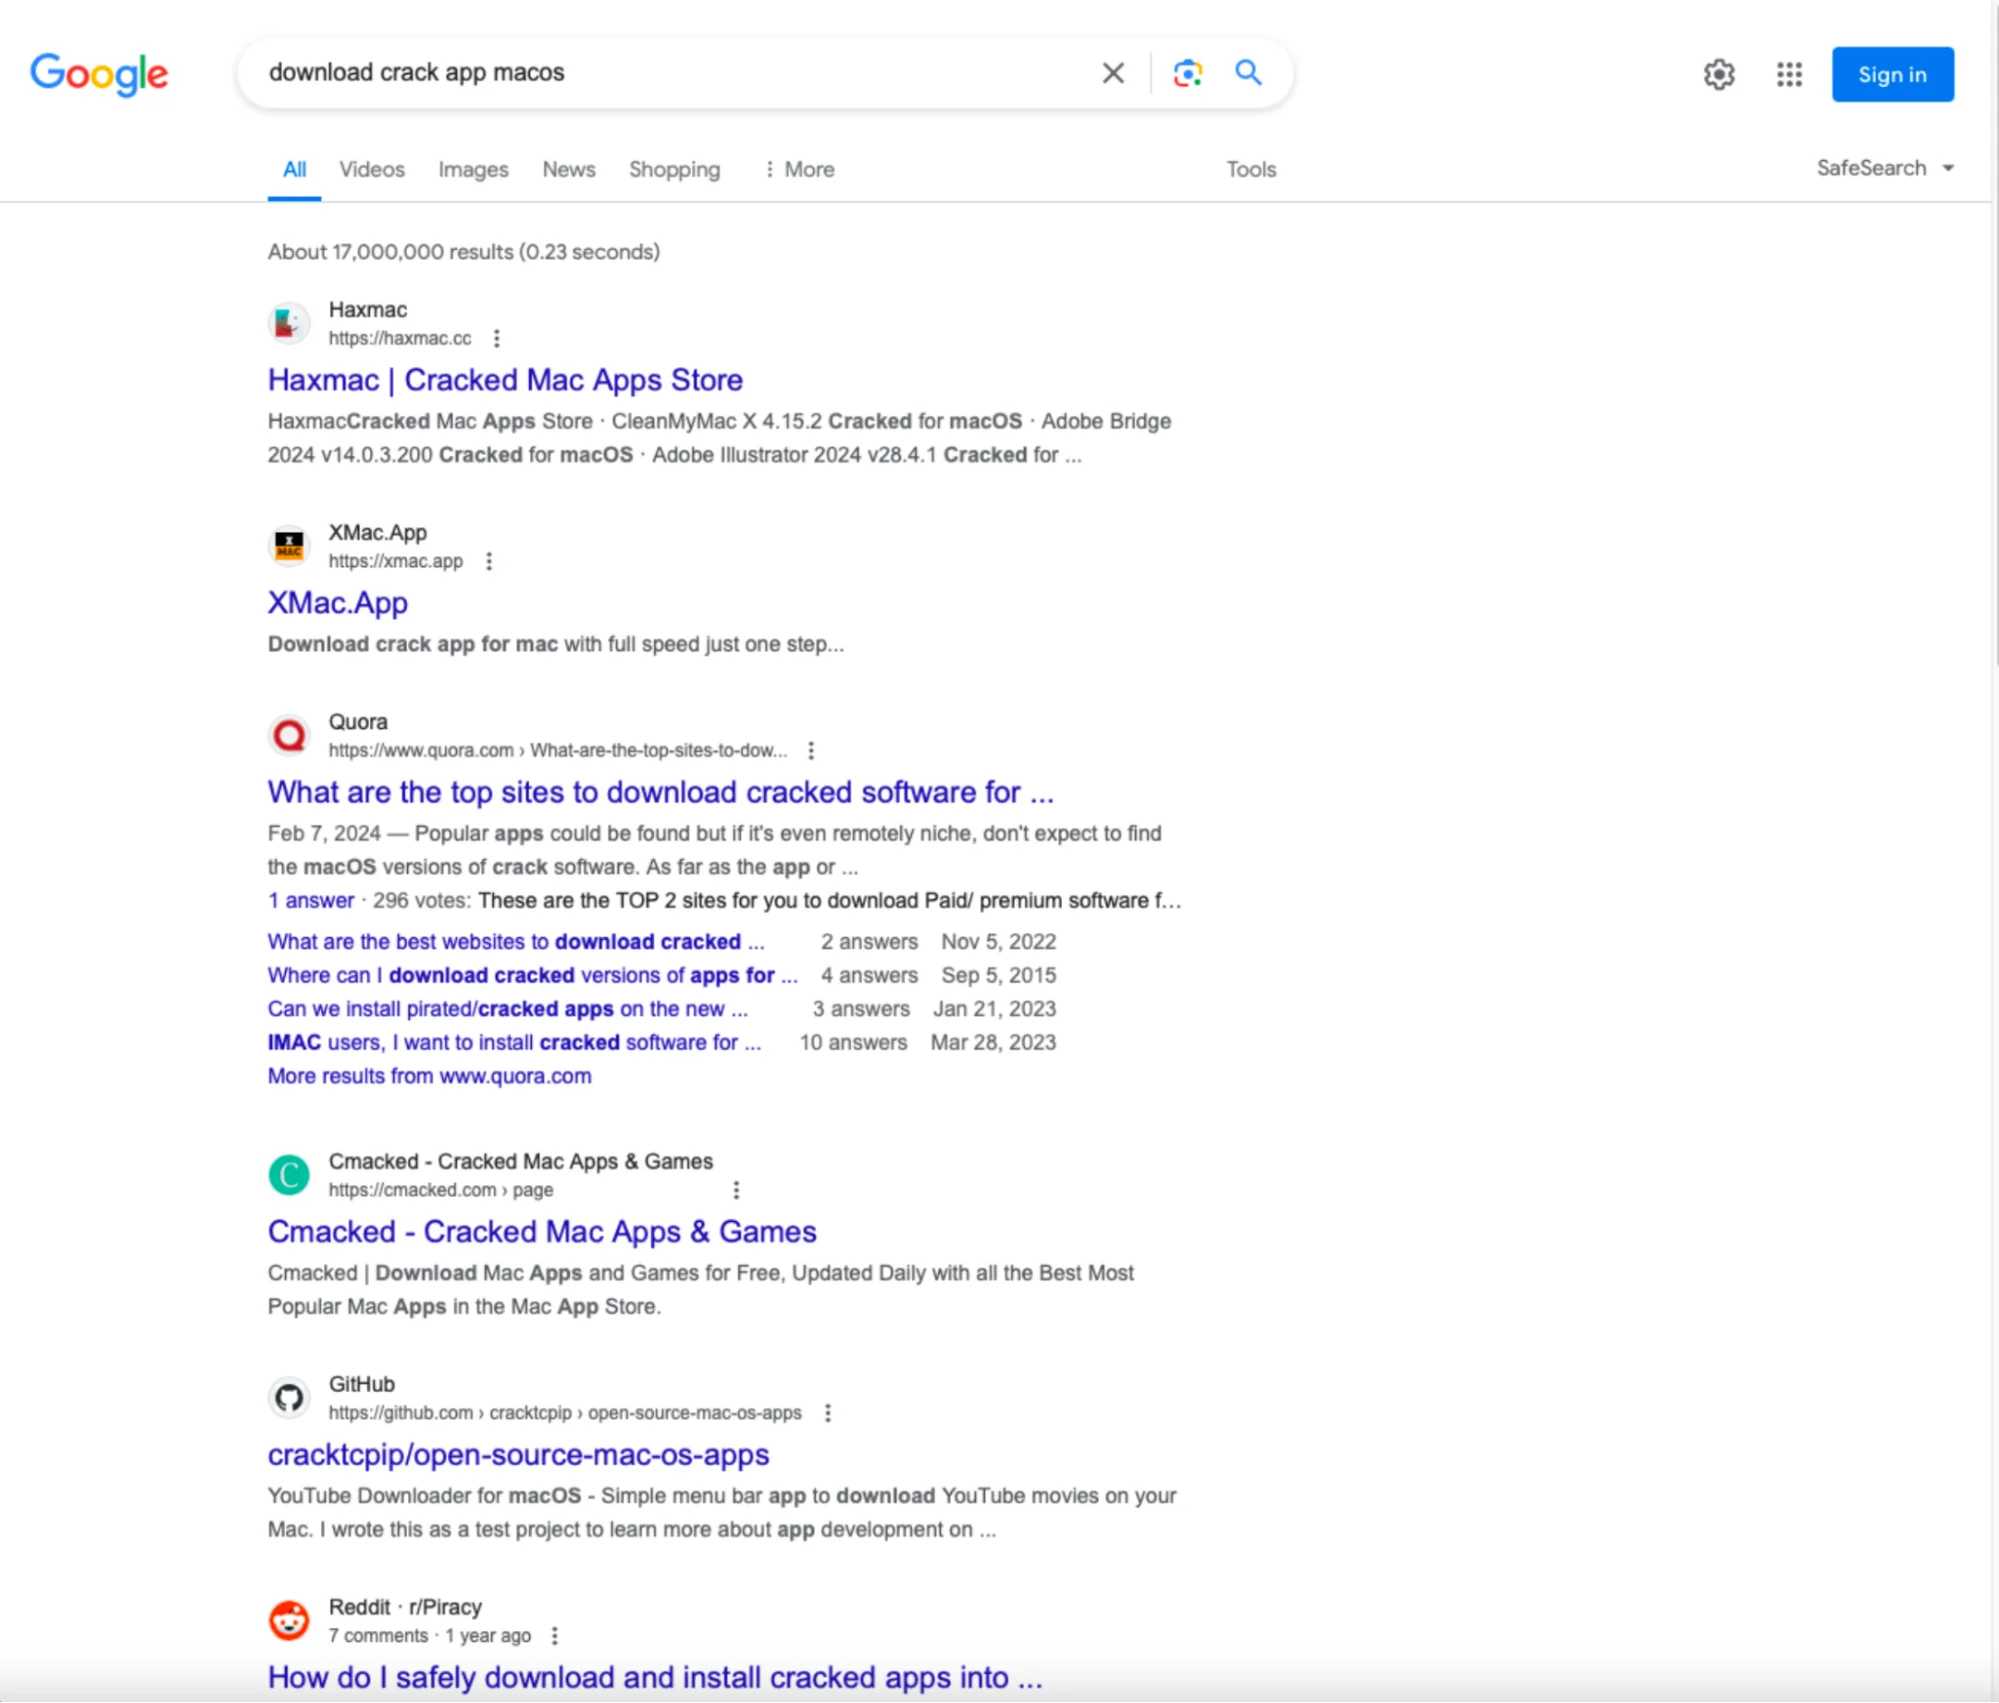 A screenshot of the search results for “download crack app macOS” query.